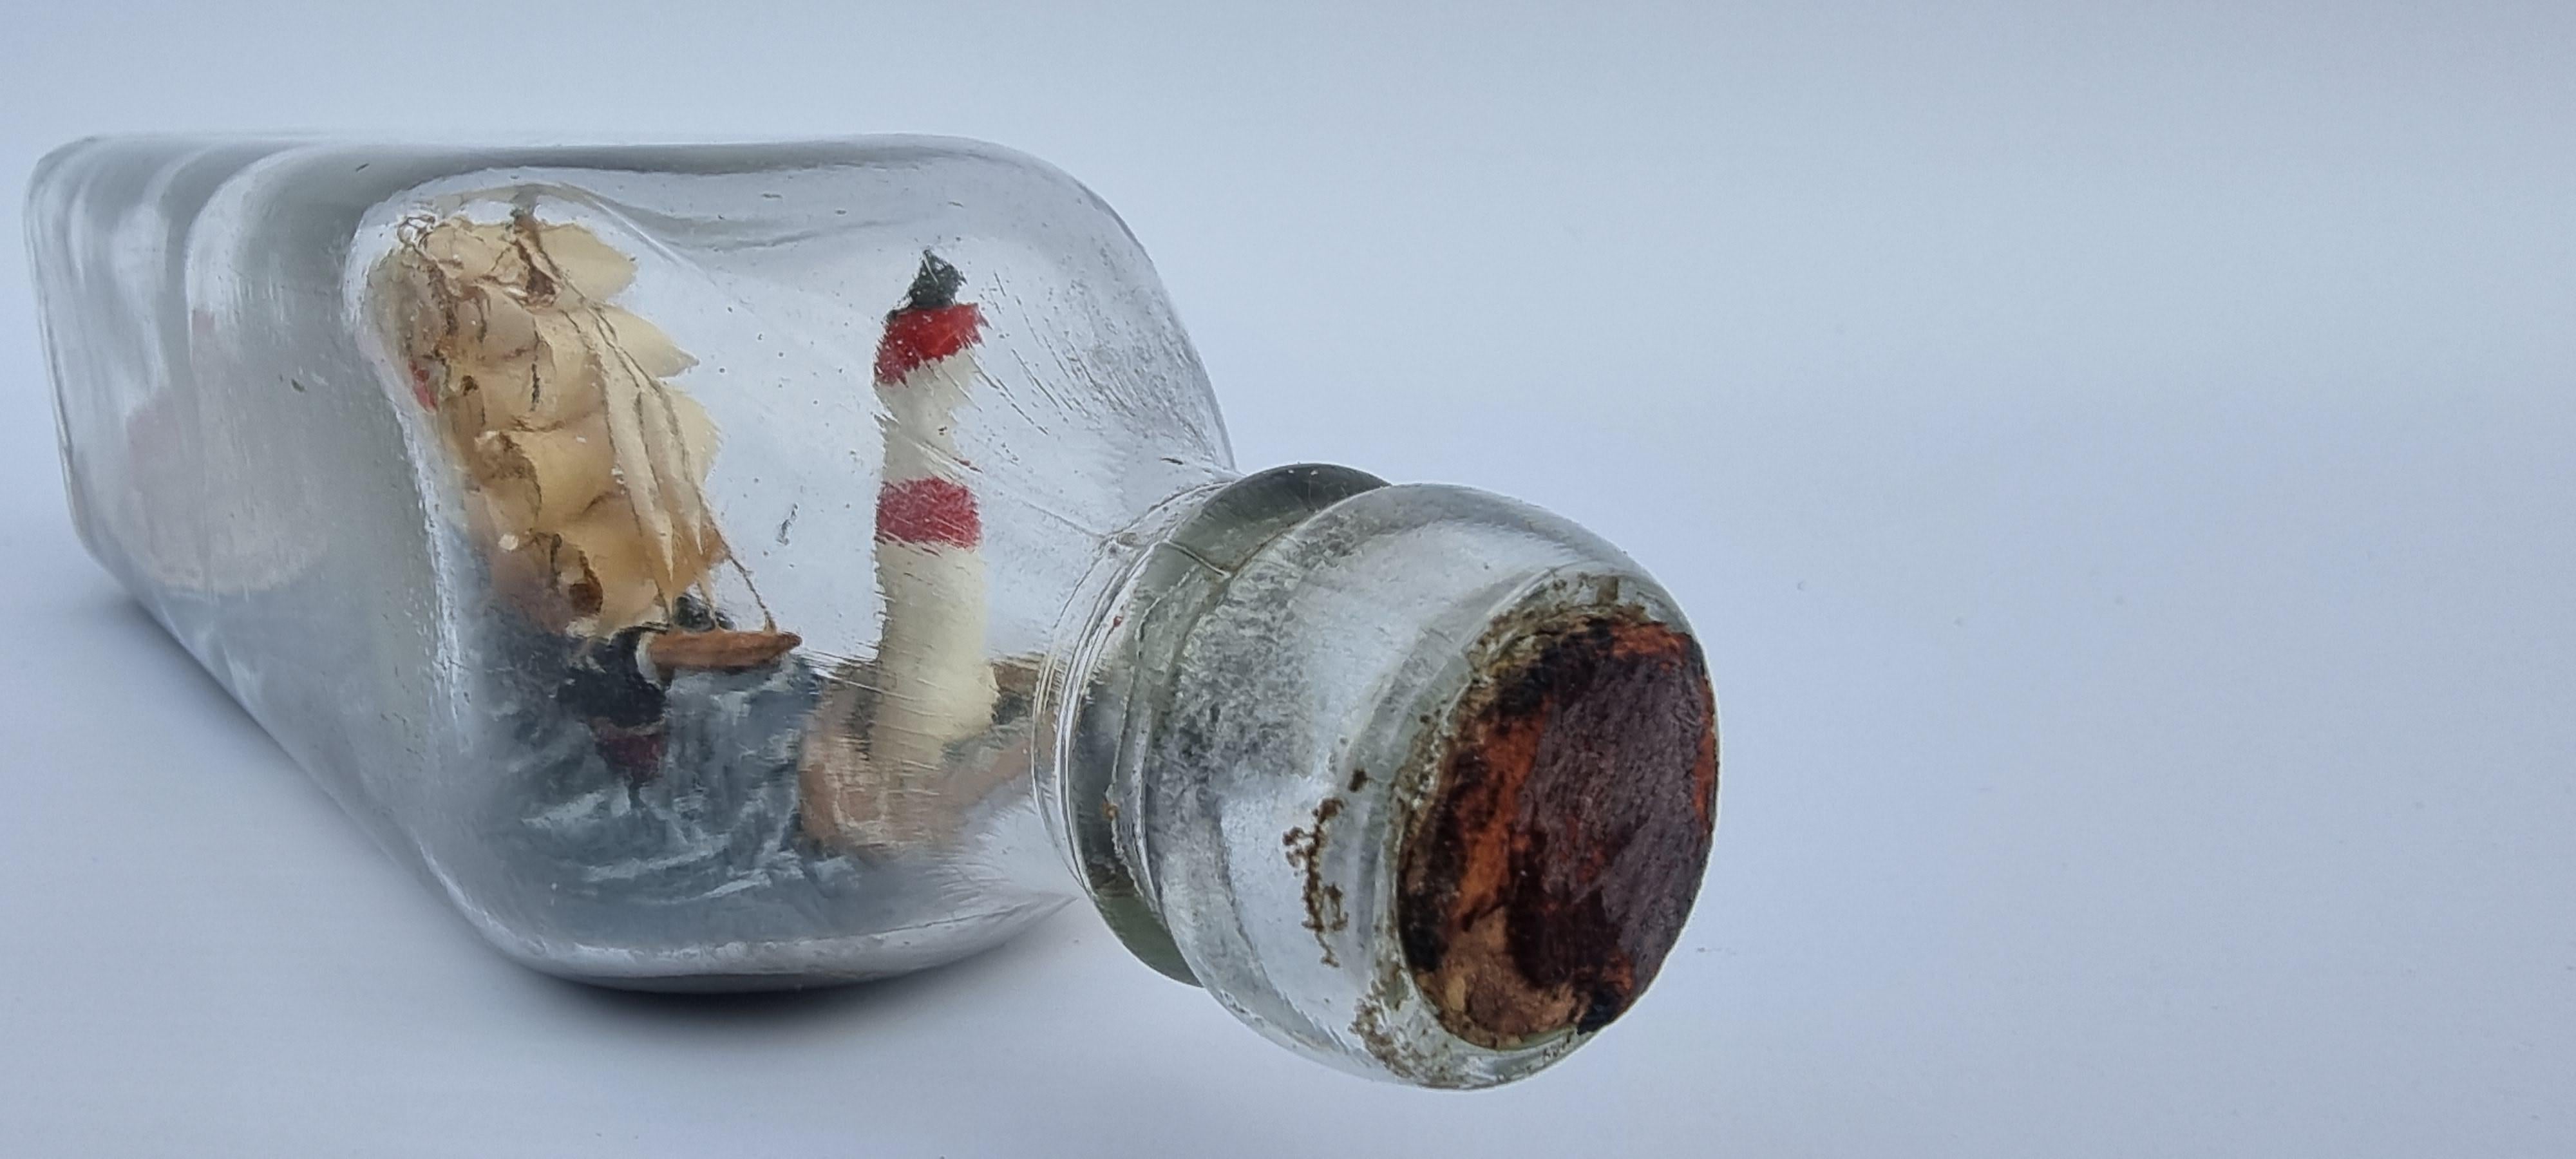 Hand-Crafted A four mast 18th century ship in a bottle, English folk art circa 1920 For Sale